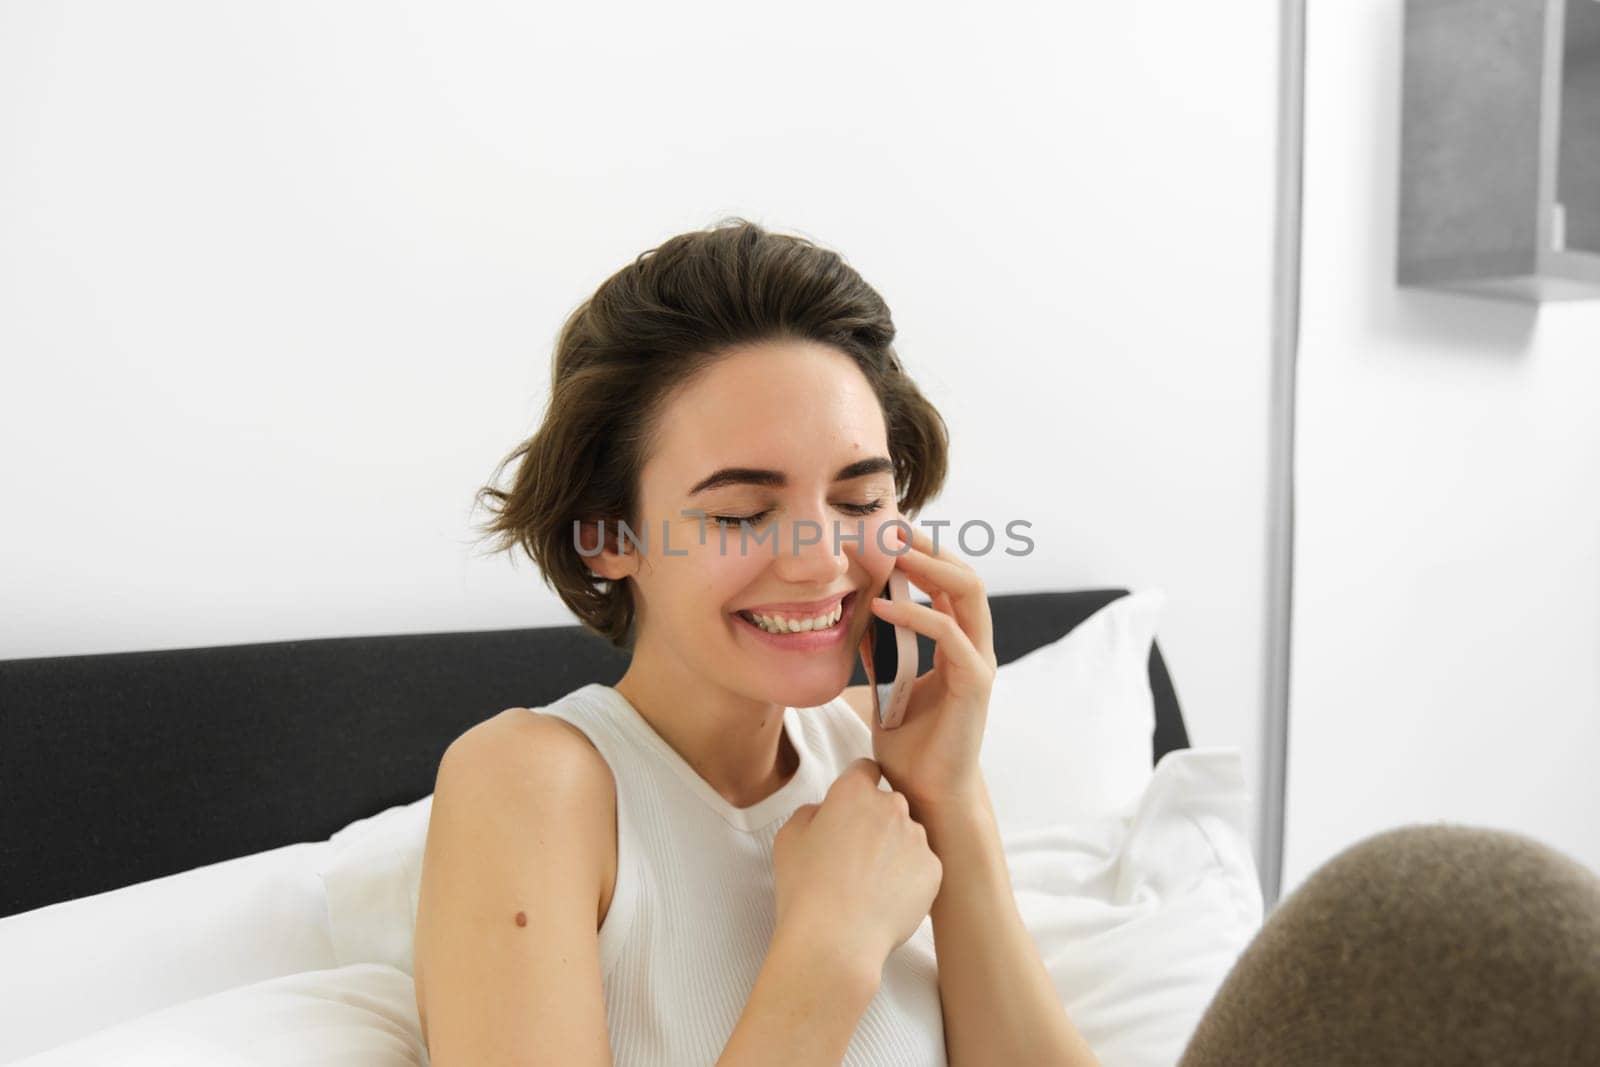 Female model sitting on bed with phone, calling friend, chatting over telephone, laughing and smiling.